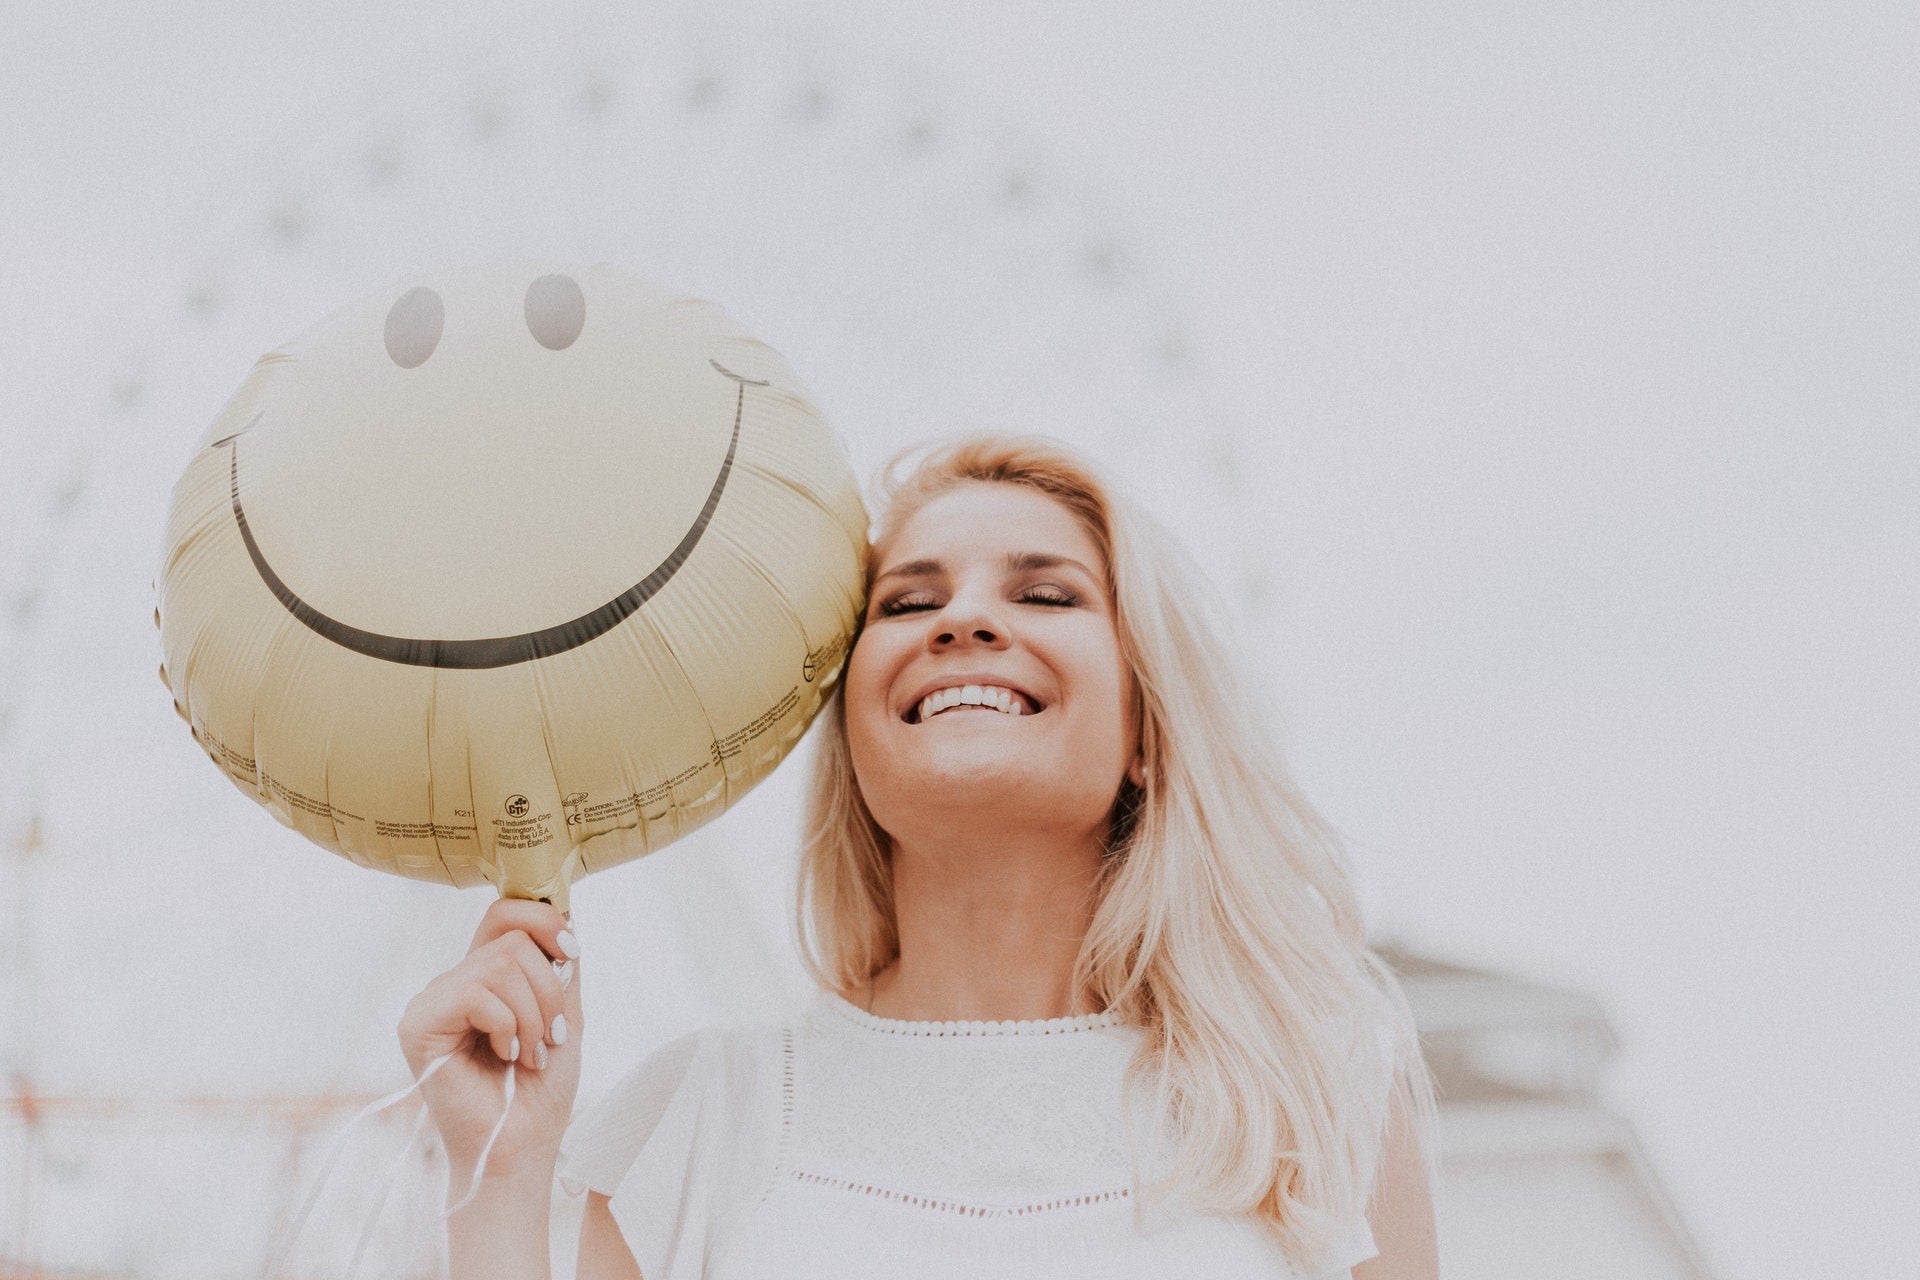 How to Be Happy Again: 5 Simple Ways to Shake Off Sadness